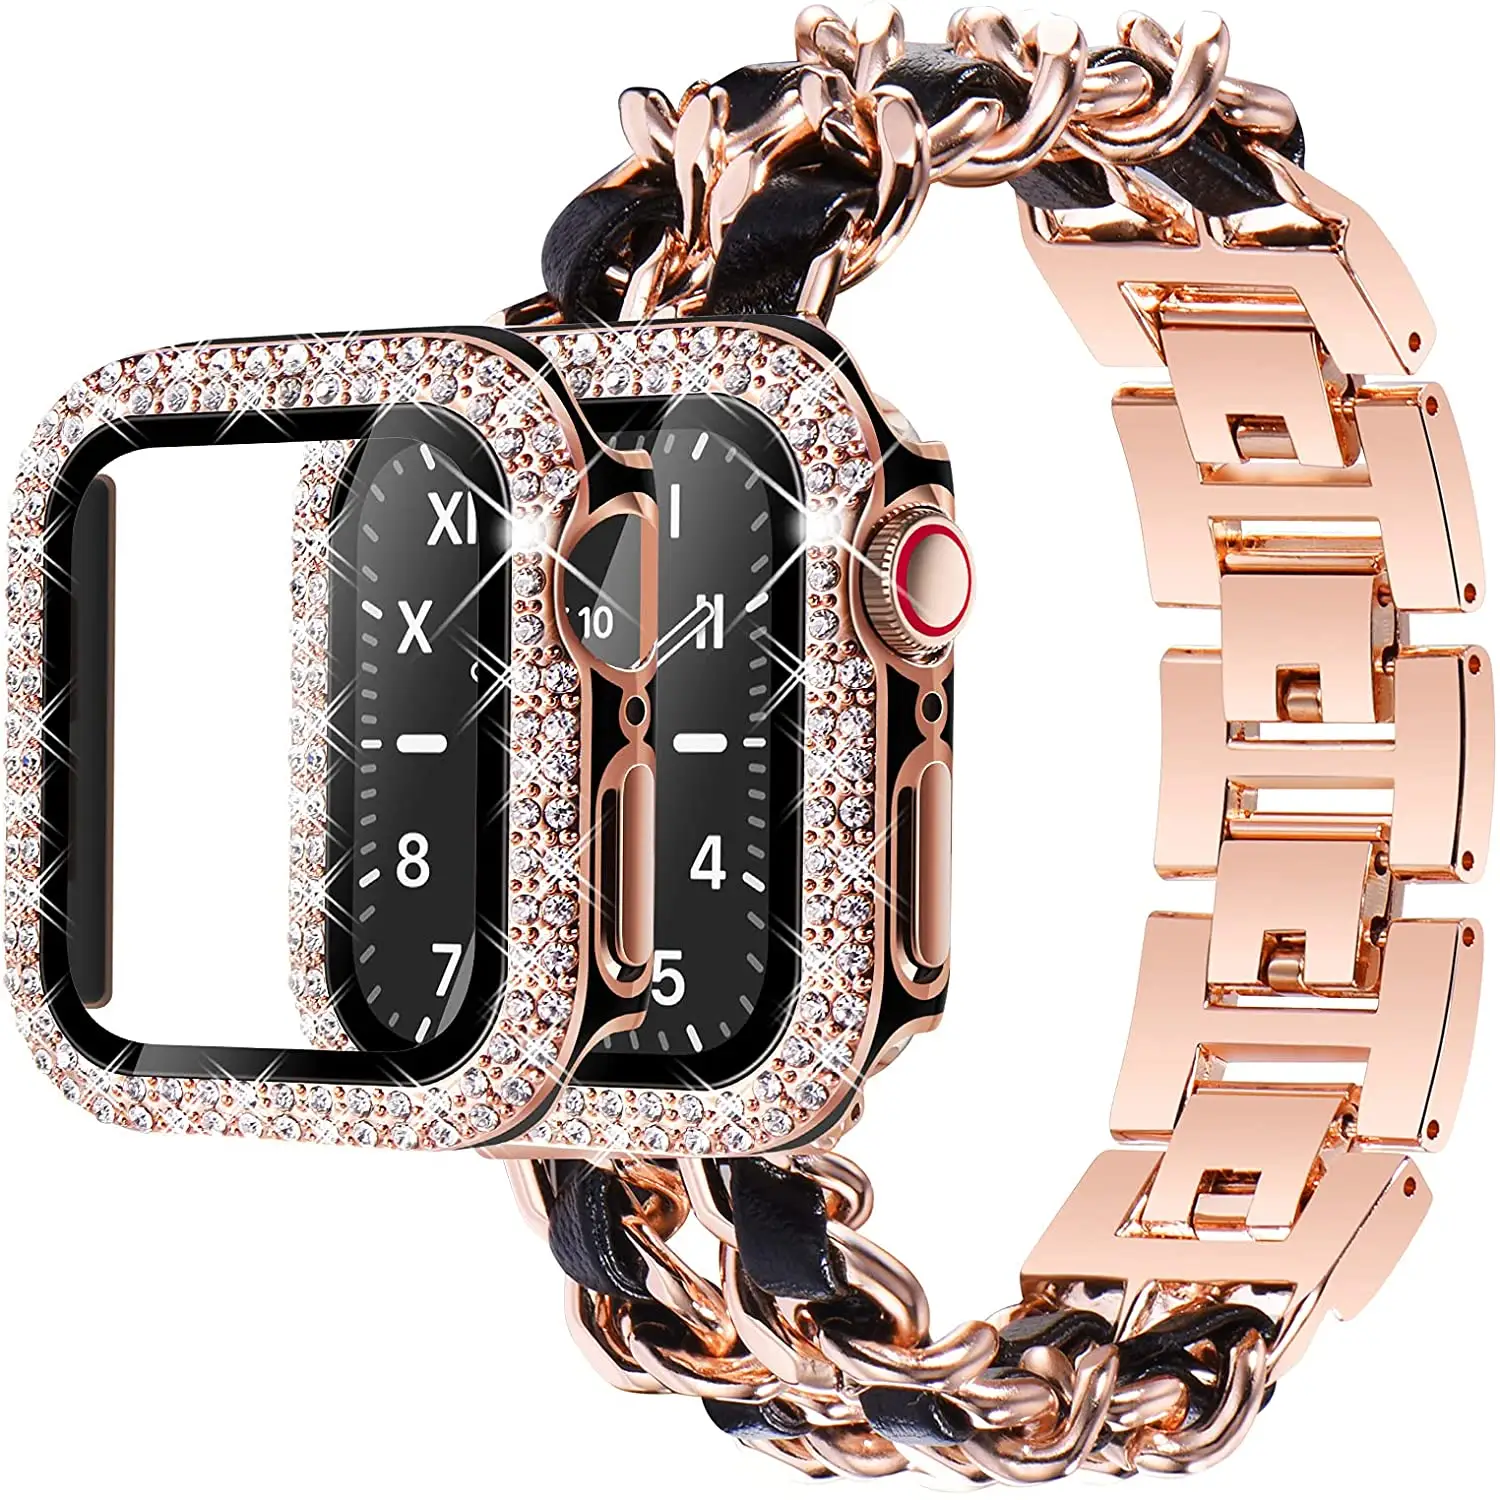 Bling Diamond Glass Screen Protector Smart Watch Case For Apple Watch Bumper Cover For Watch Series 6 5 4 3 SE Case